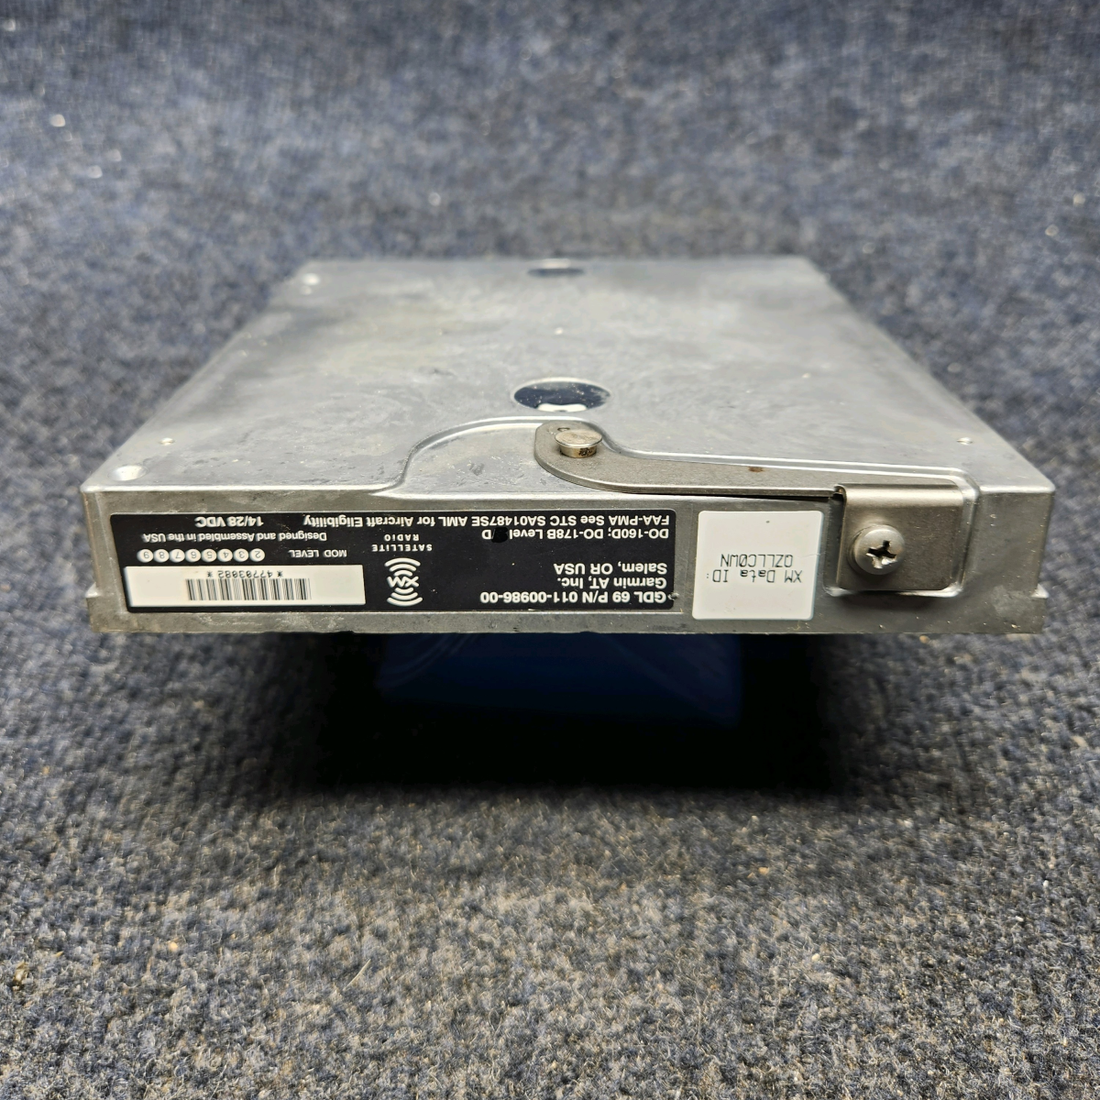 Used aircraft parts for sale, 011-00986-00 PIPIR PA32RT-300 GARMIN GDL 69 XM WEATHER RECEIVER